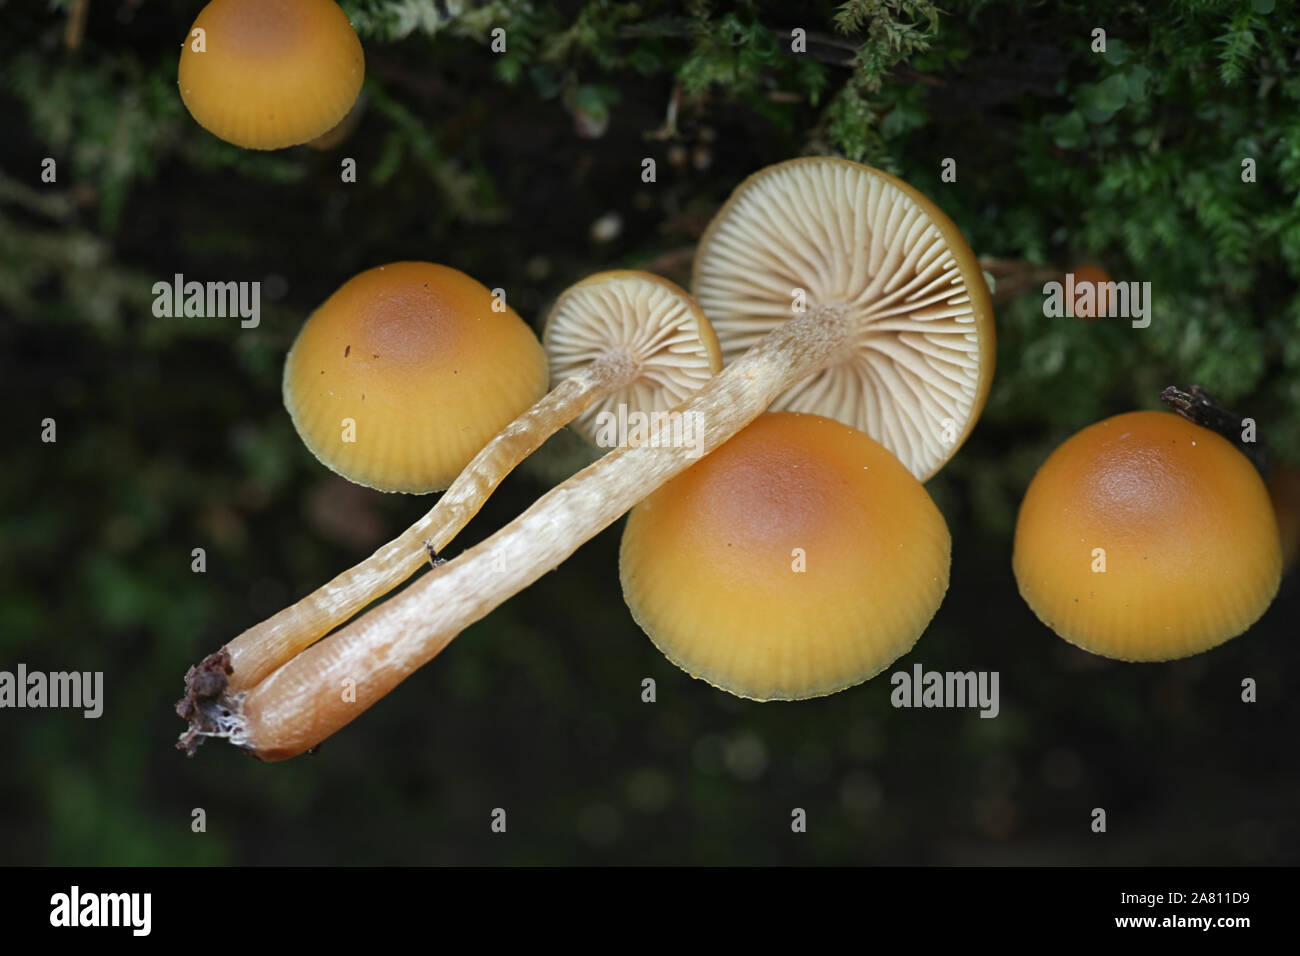 Galerina marginata, known as the Funeral Bell mushroom or deadly Galerina, a deadly poisonous mushroom from Finalnd Stock Photo